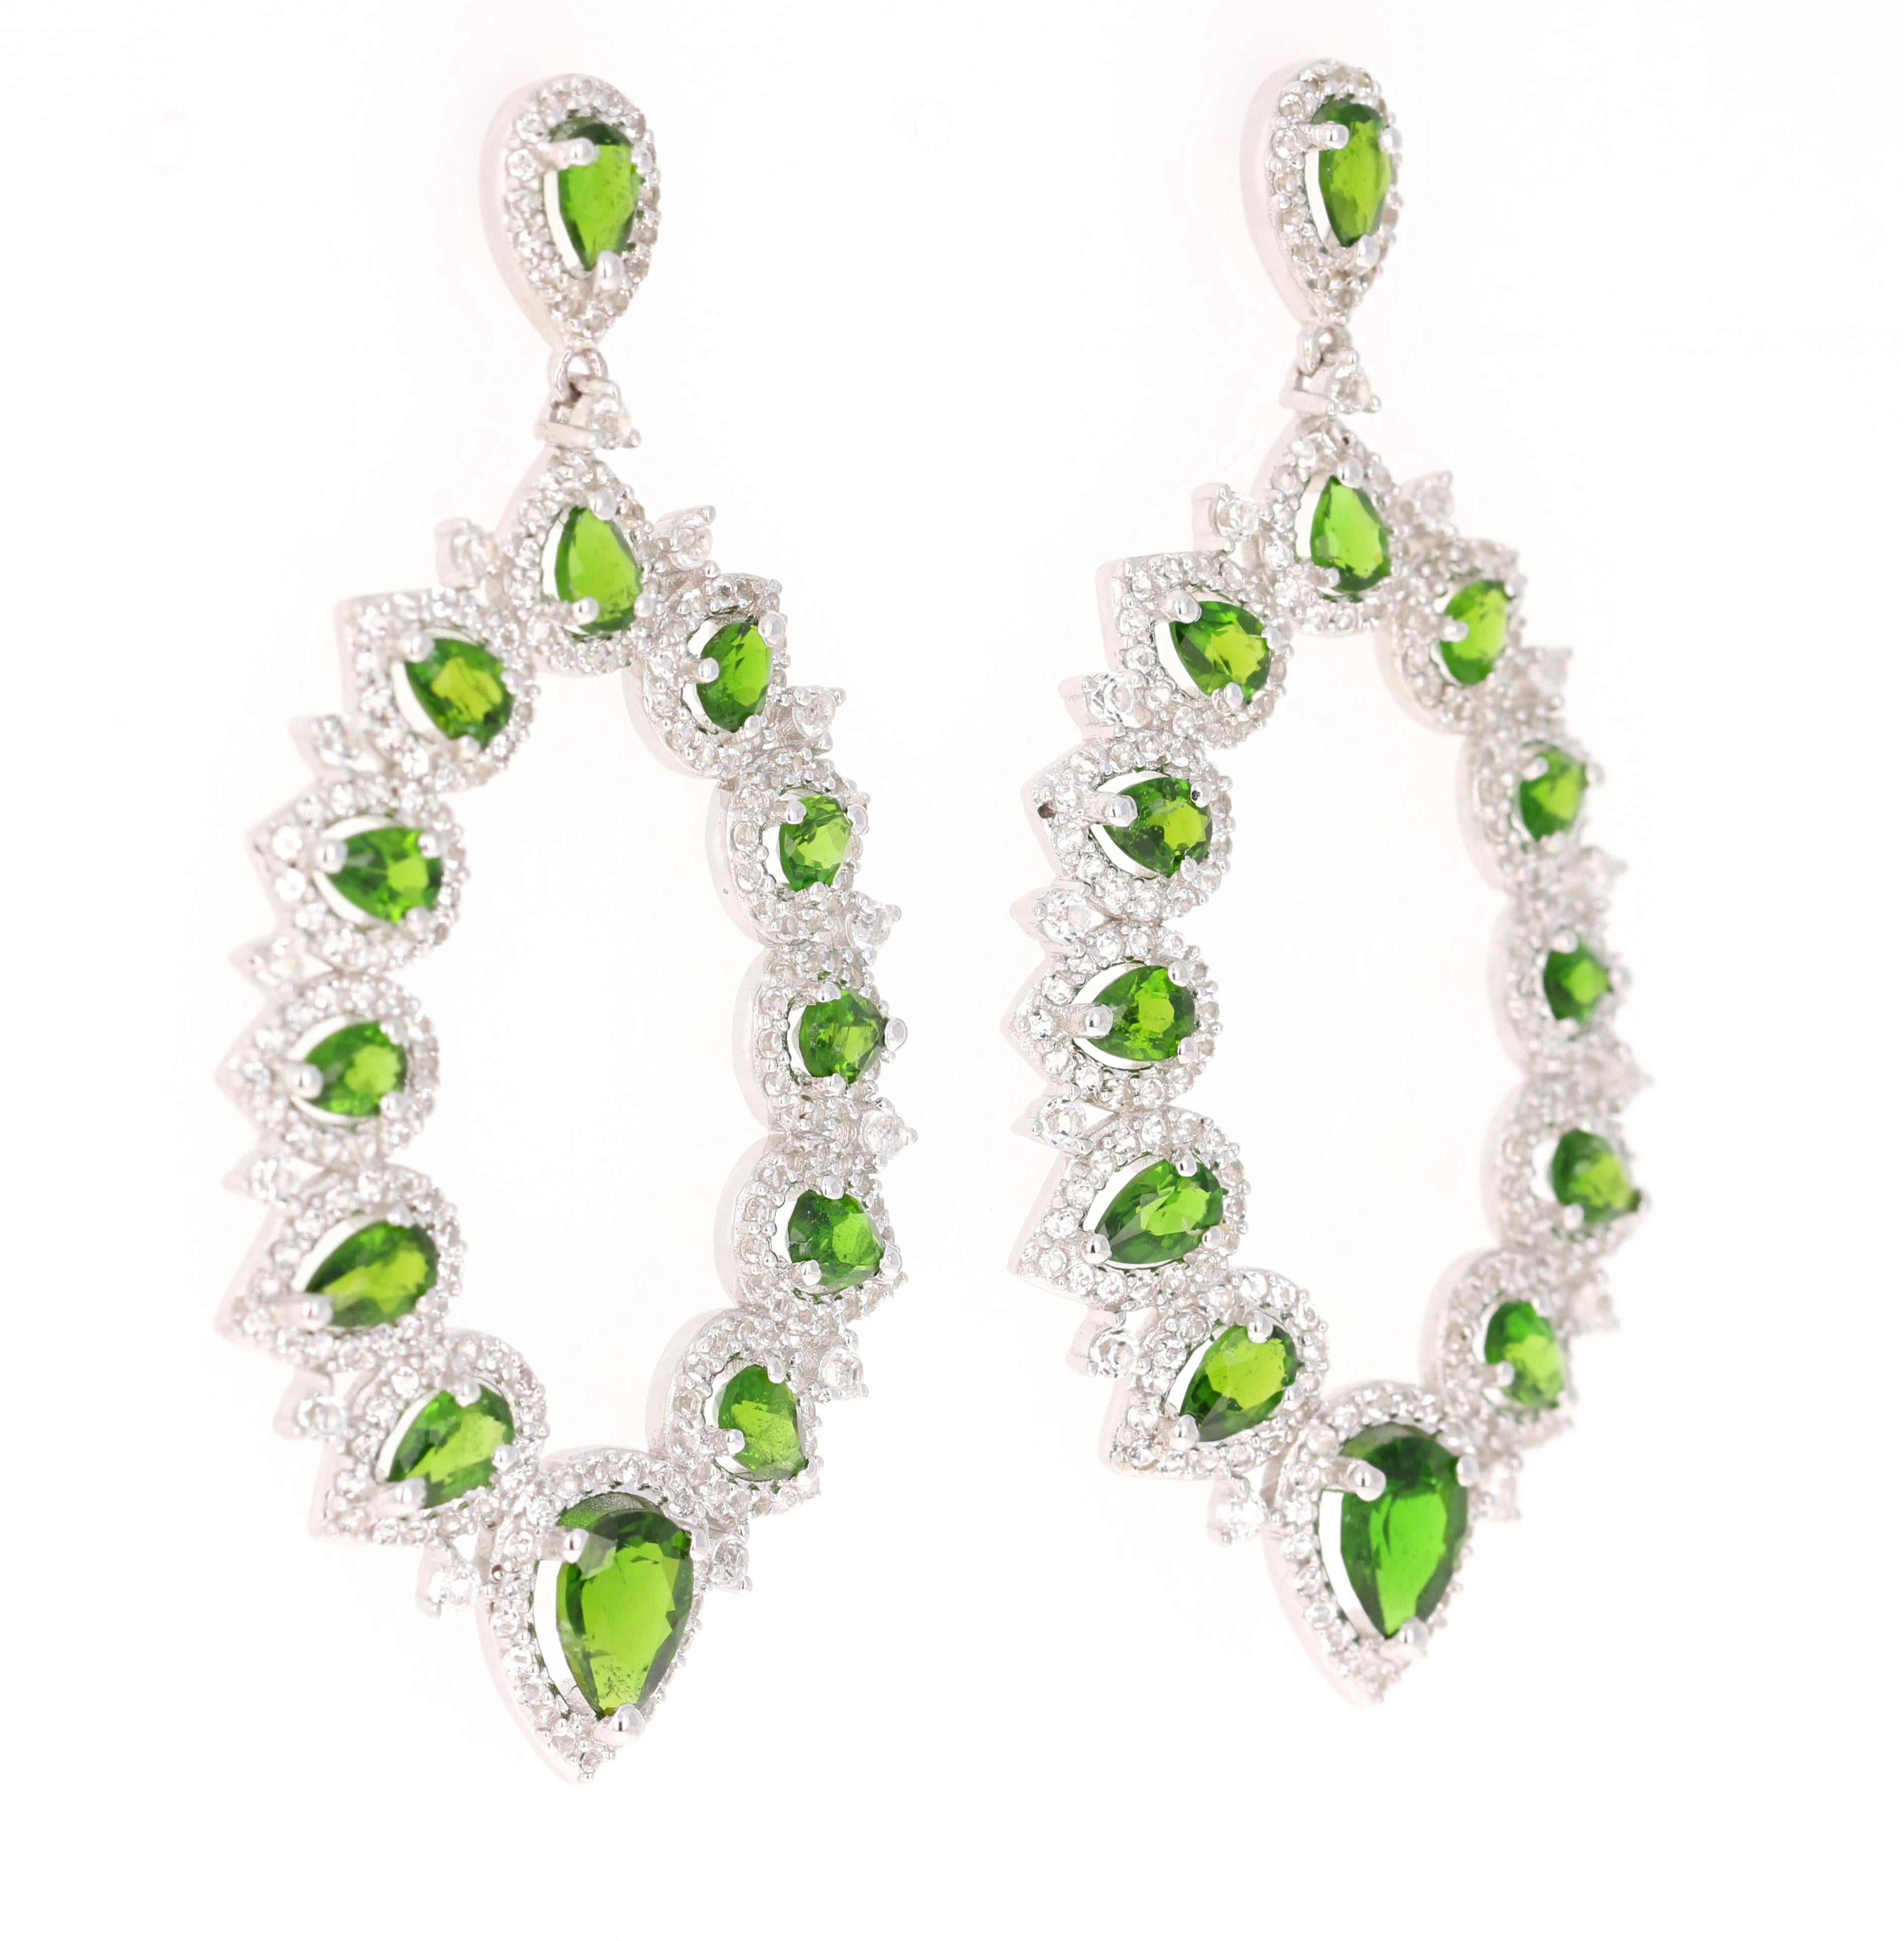 Stunning Chandelier Dangle Earrings 

These earrings have 4.48 Carats of Chrome Diopside and White Topaz

They are beautifully curated in 925 Silver weighing approximately 13.0 grams 

They are 2 inches long. 
